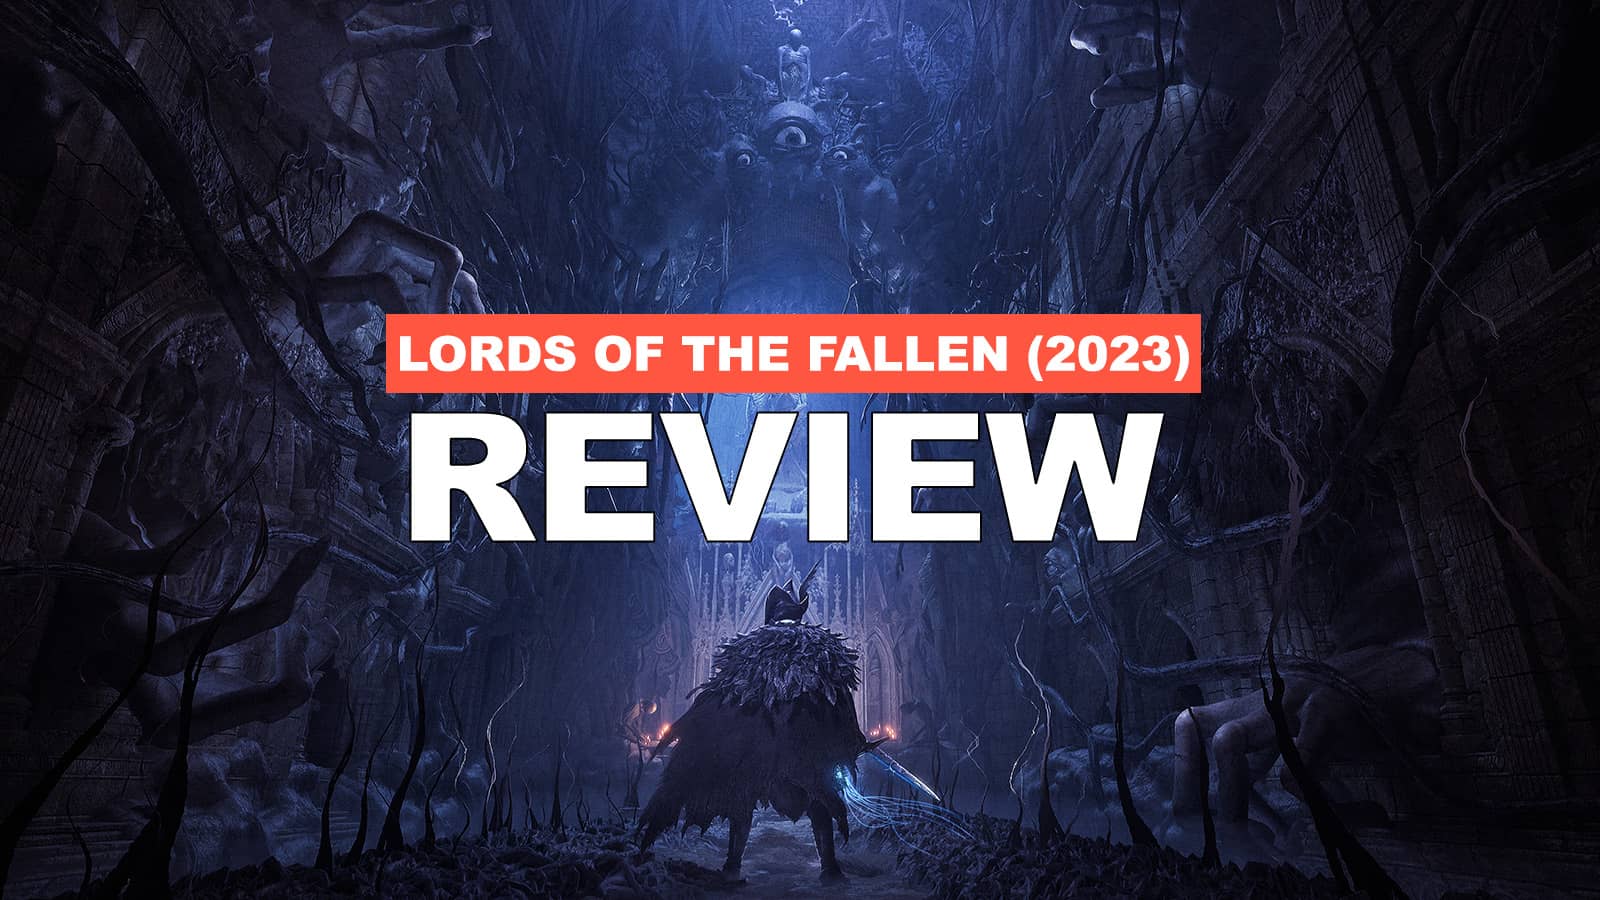 Lords of the Fallen (2023) sticks very close to the Dark Souls formula -  Polygon